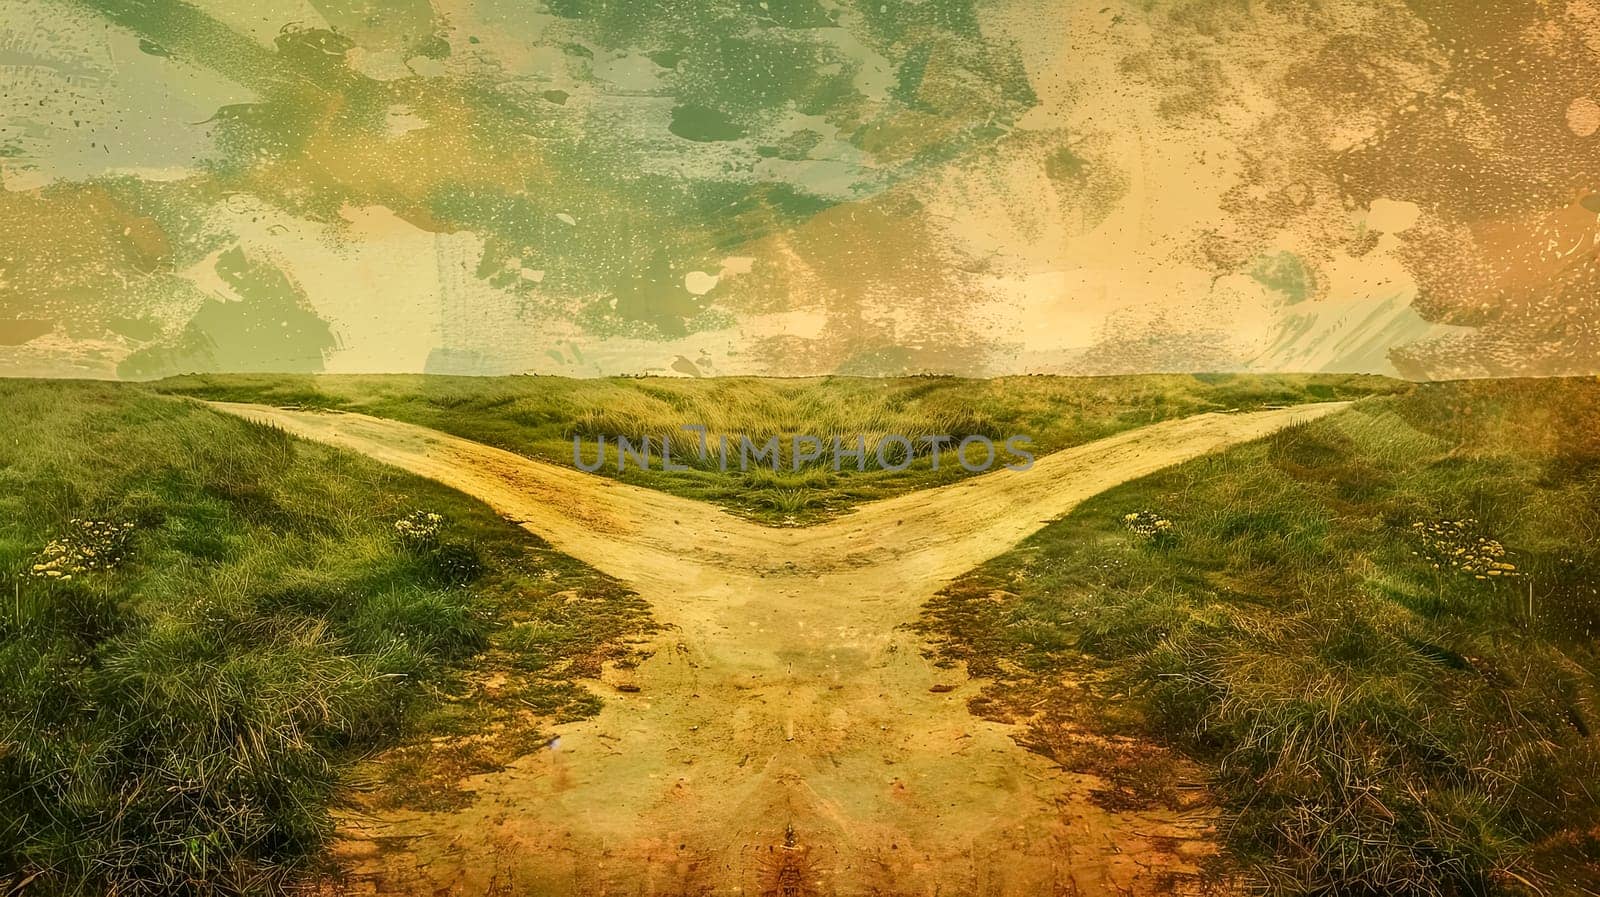 Forked countryside path with vintage overlay by Edophoto